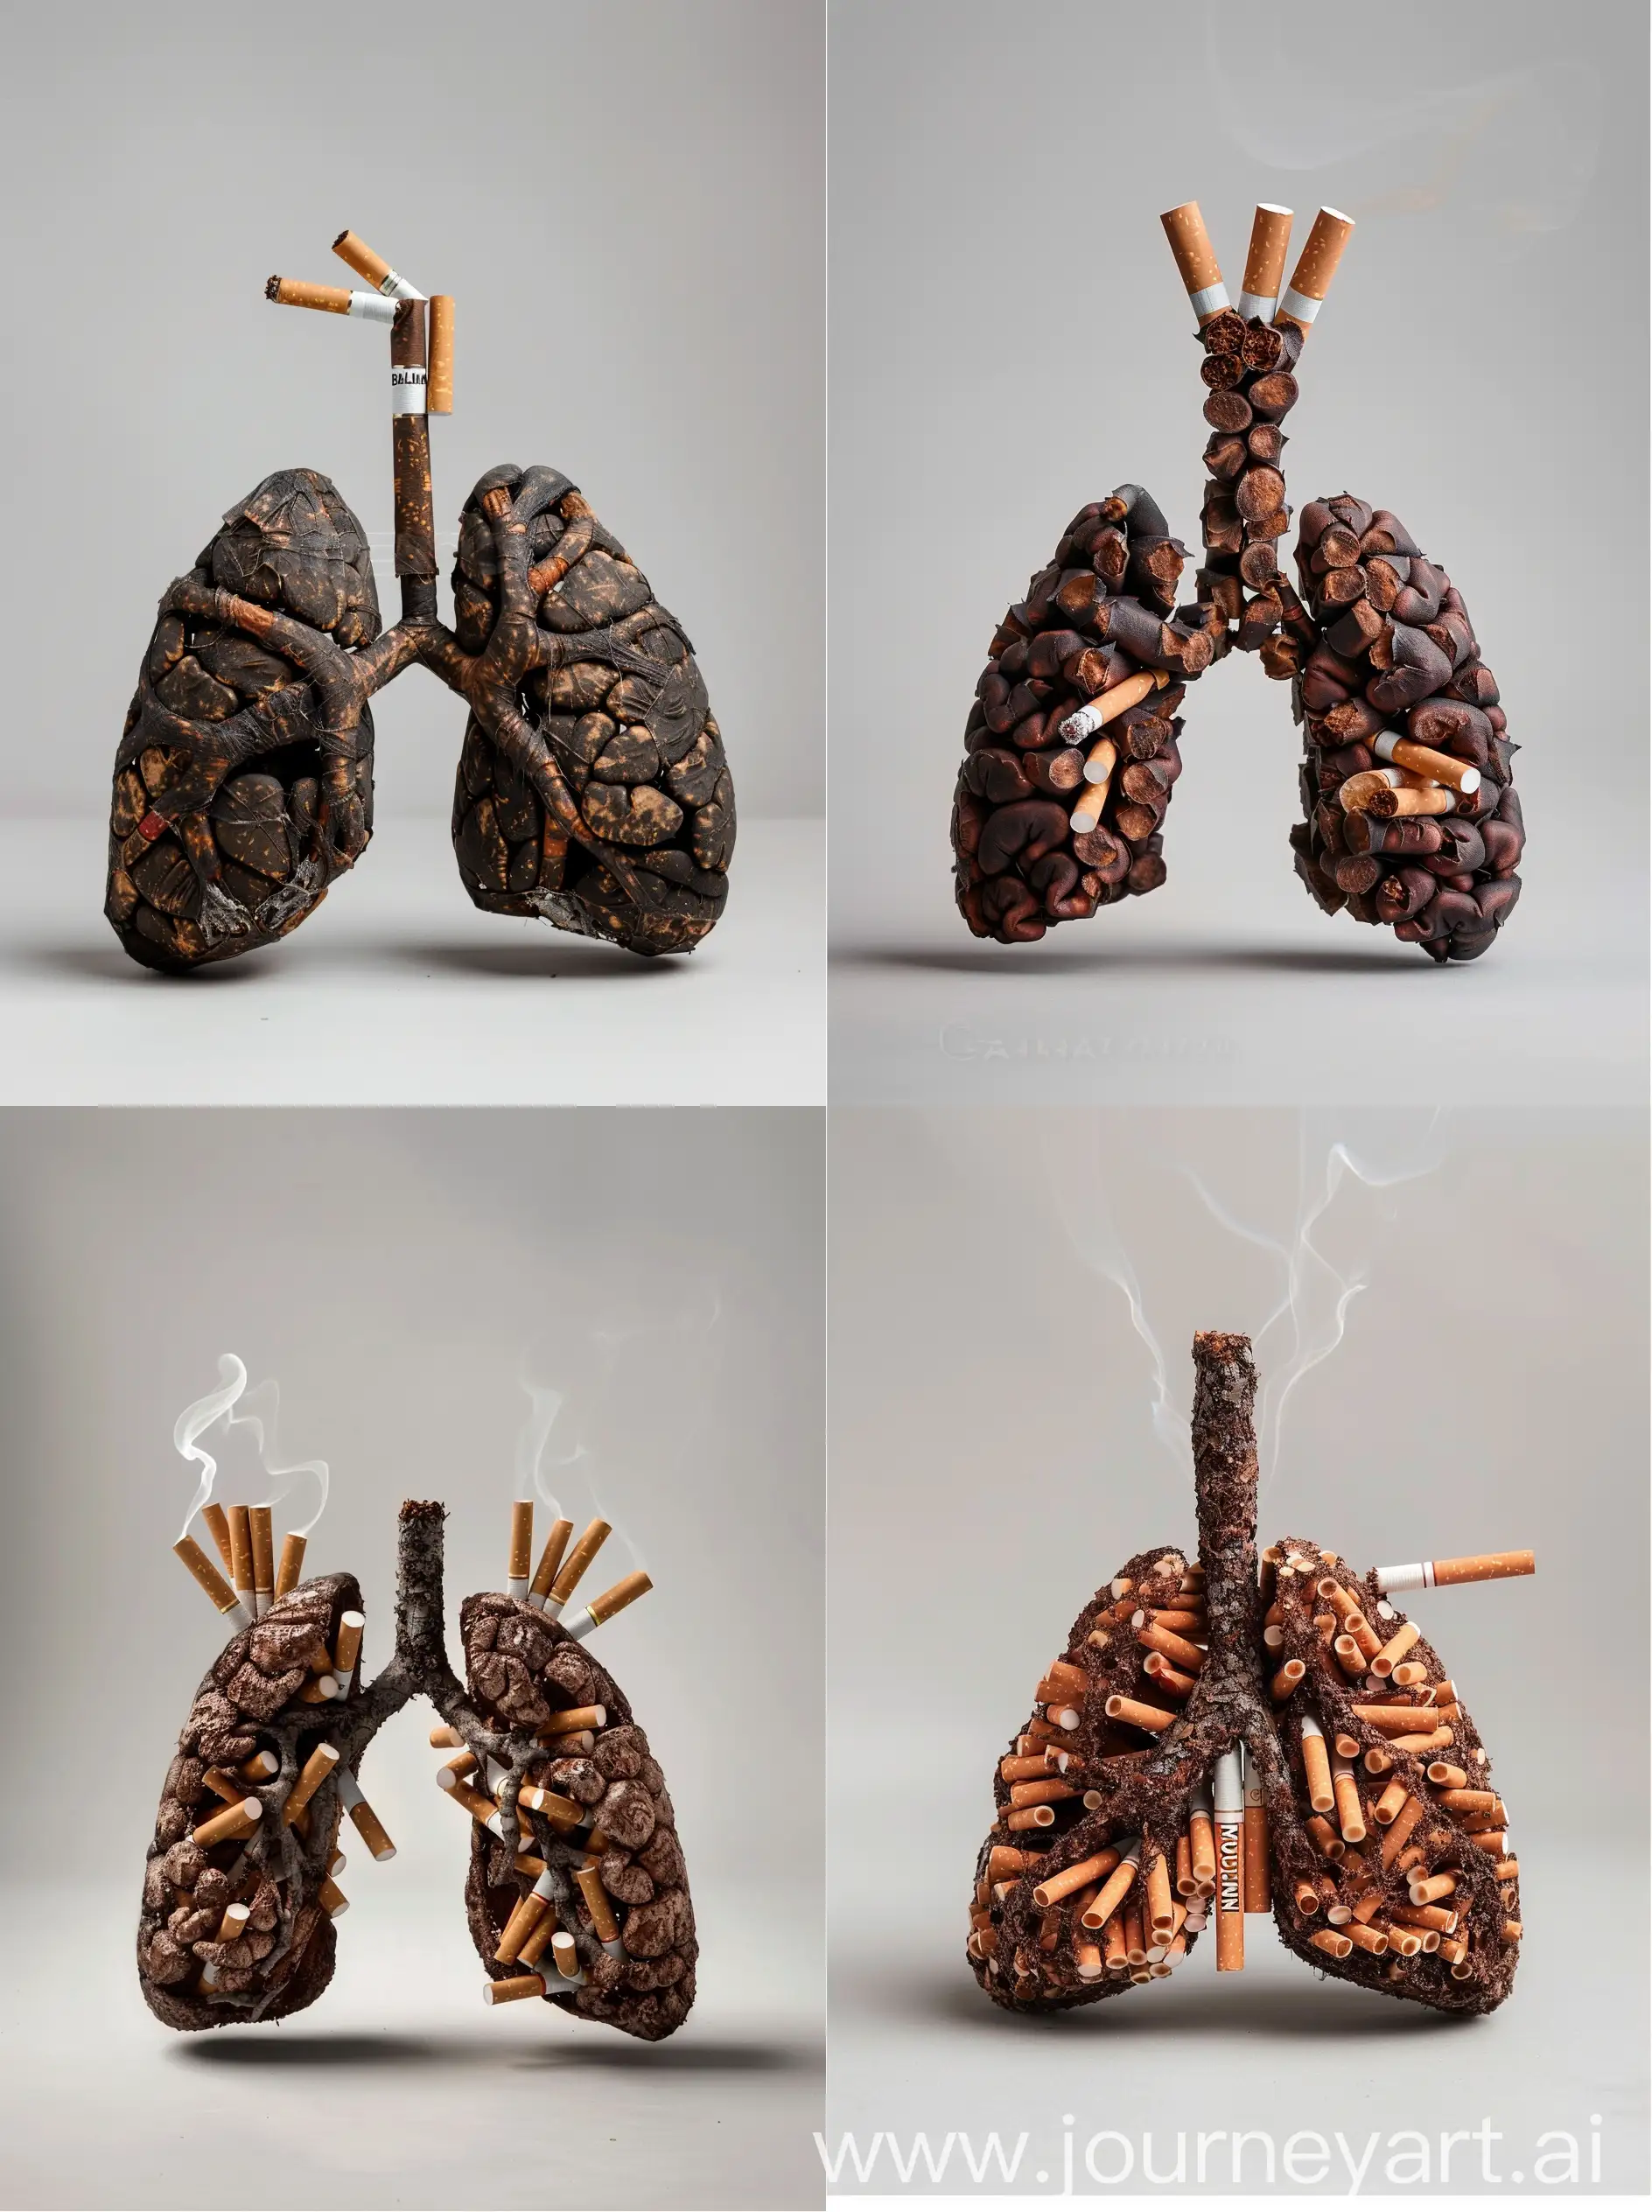 An eyecatching and thought-provoking stock photo of human lungs made from cigarettes, showcasing the environmental impact on health with copy space for "BALKomen" branding. The contrast between darkened casts from smoking against a light grey backdrop creates a visually striking composition. Ensure that all elements are centered in the frame to emphasize their significance. This design should make viewers reflect on the health impacts of smoking in the style of "C Palace 207". --ar 57:77